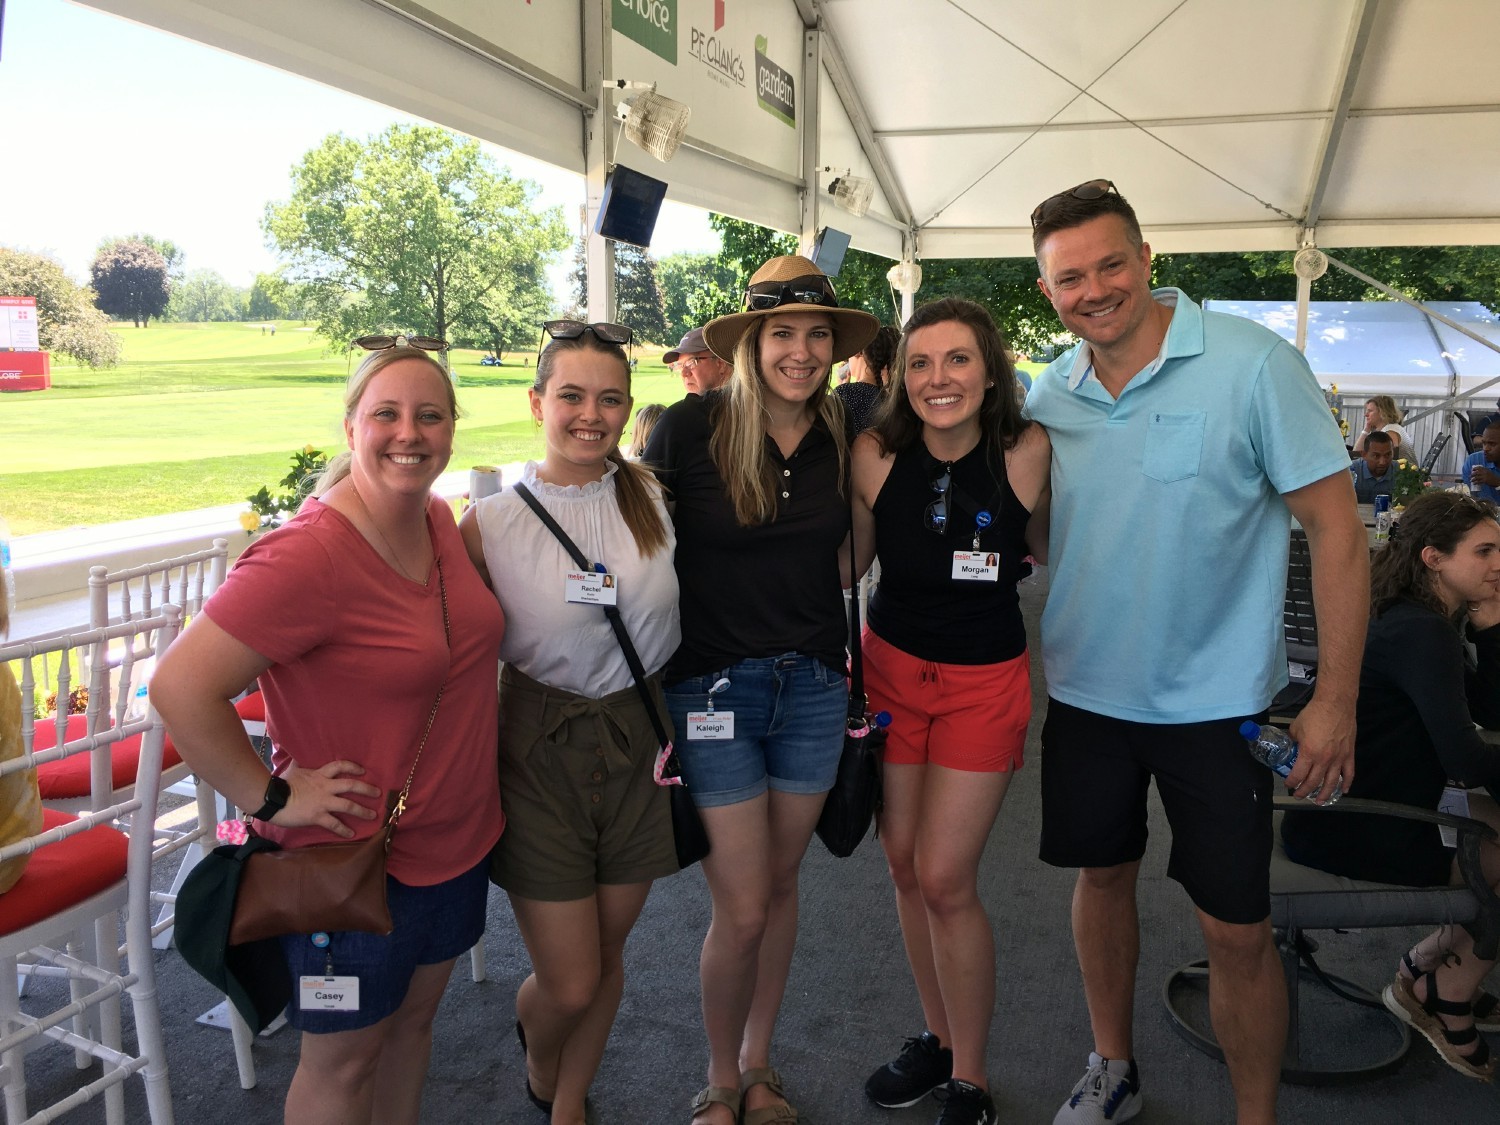 Members of Meijer Marketing team enjoy an afternoon at the team member tent at the Meijer LPGA Classic for Simply Give.